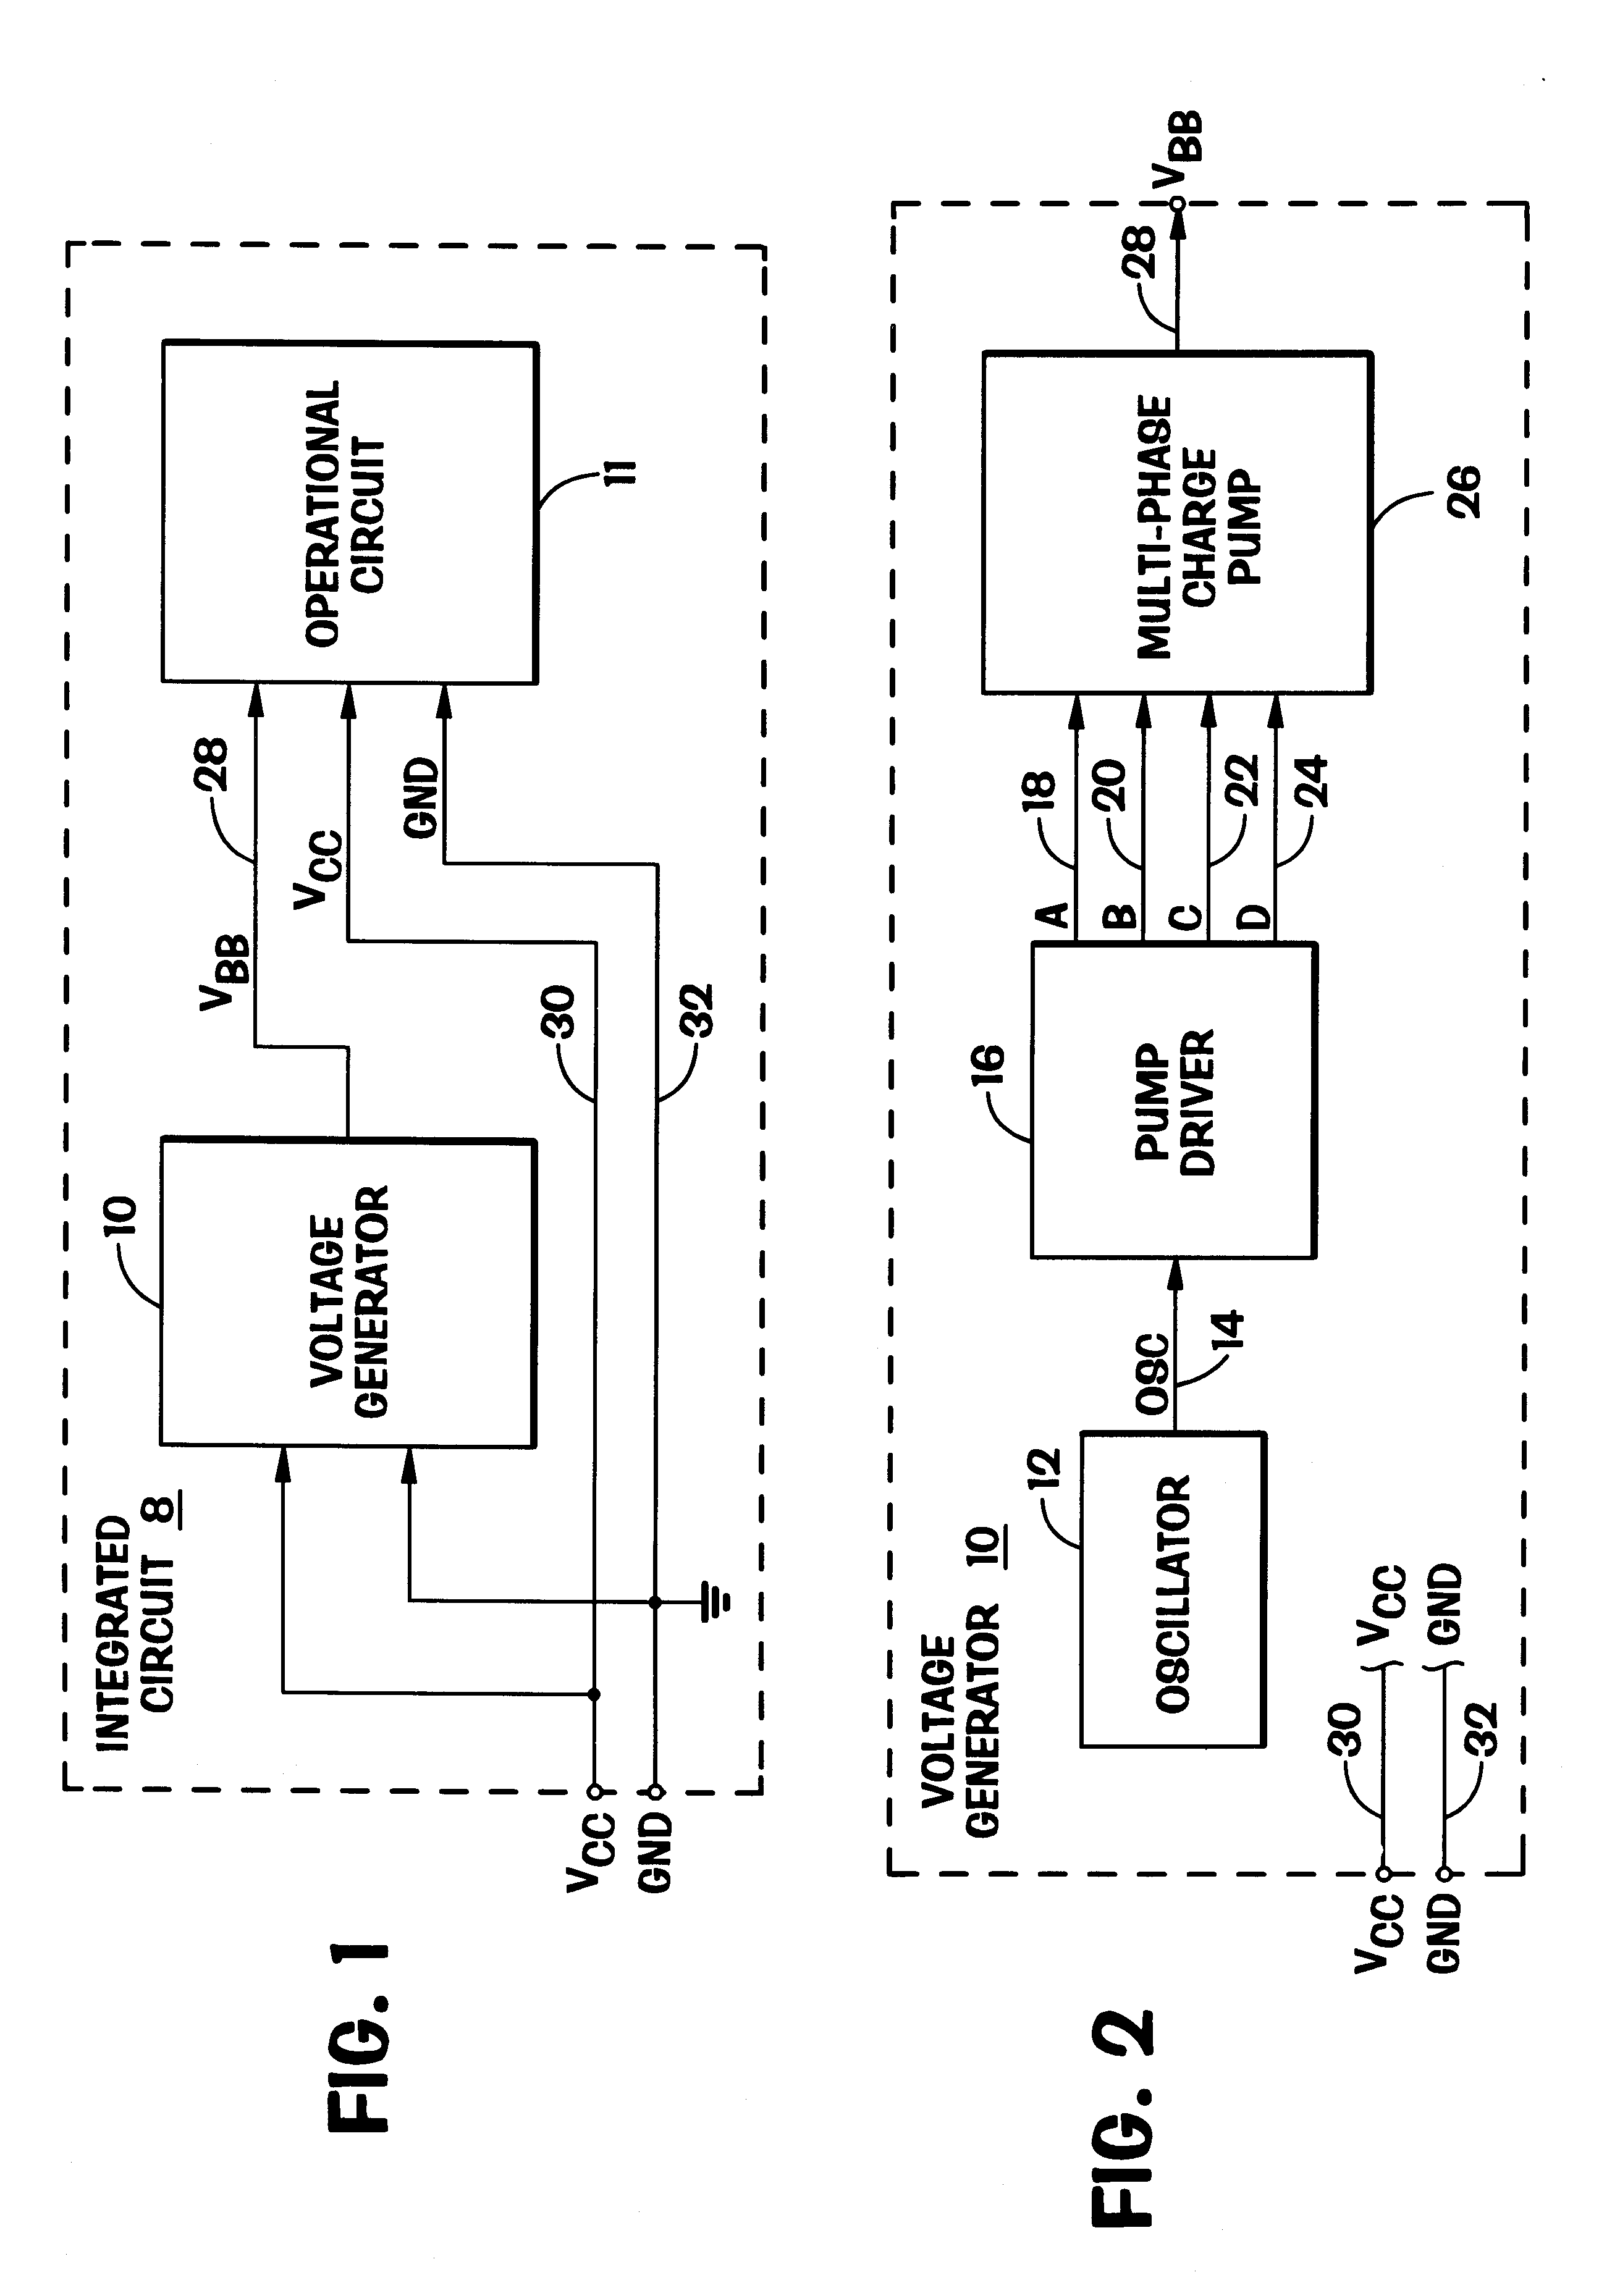 Method for protecting an integrated circuit during burn-in testing